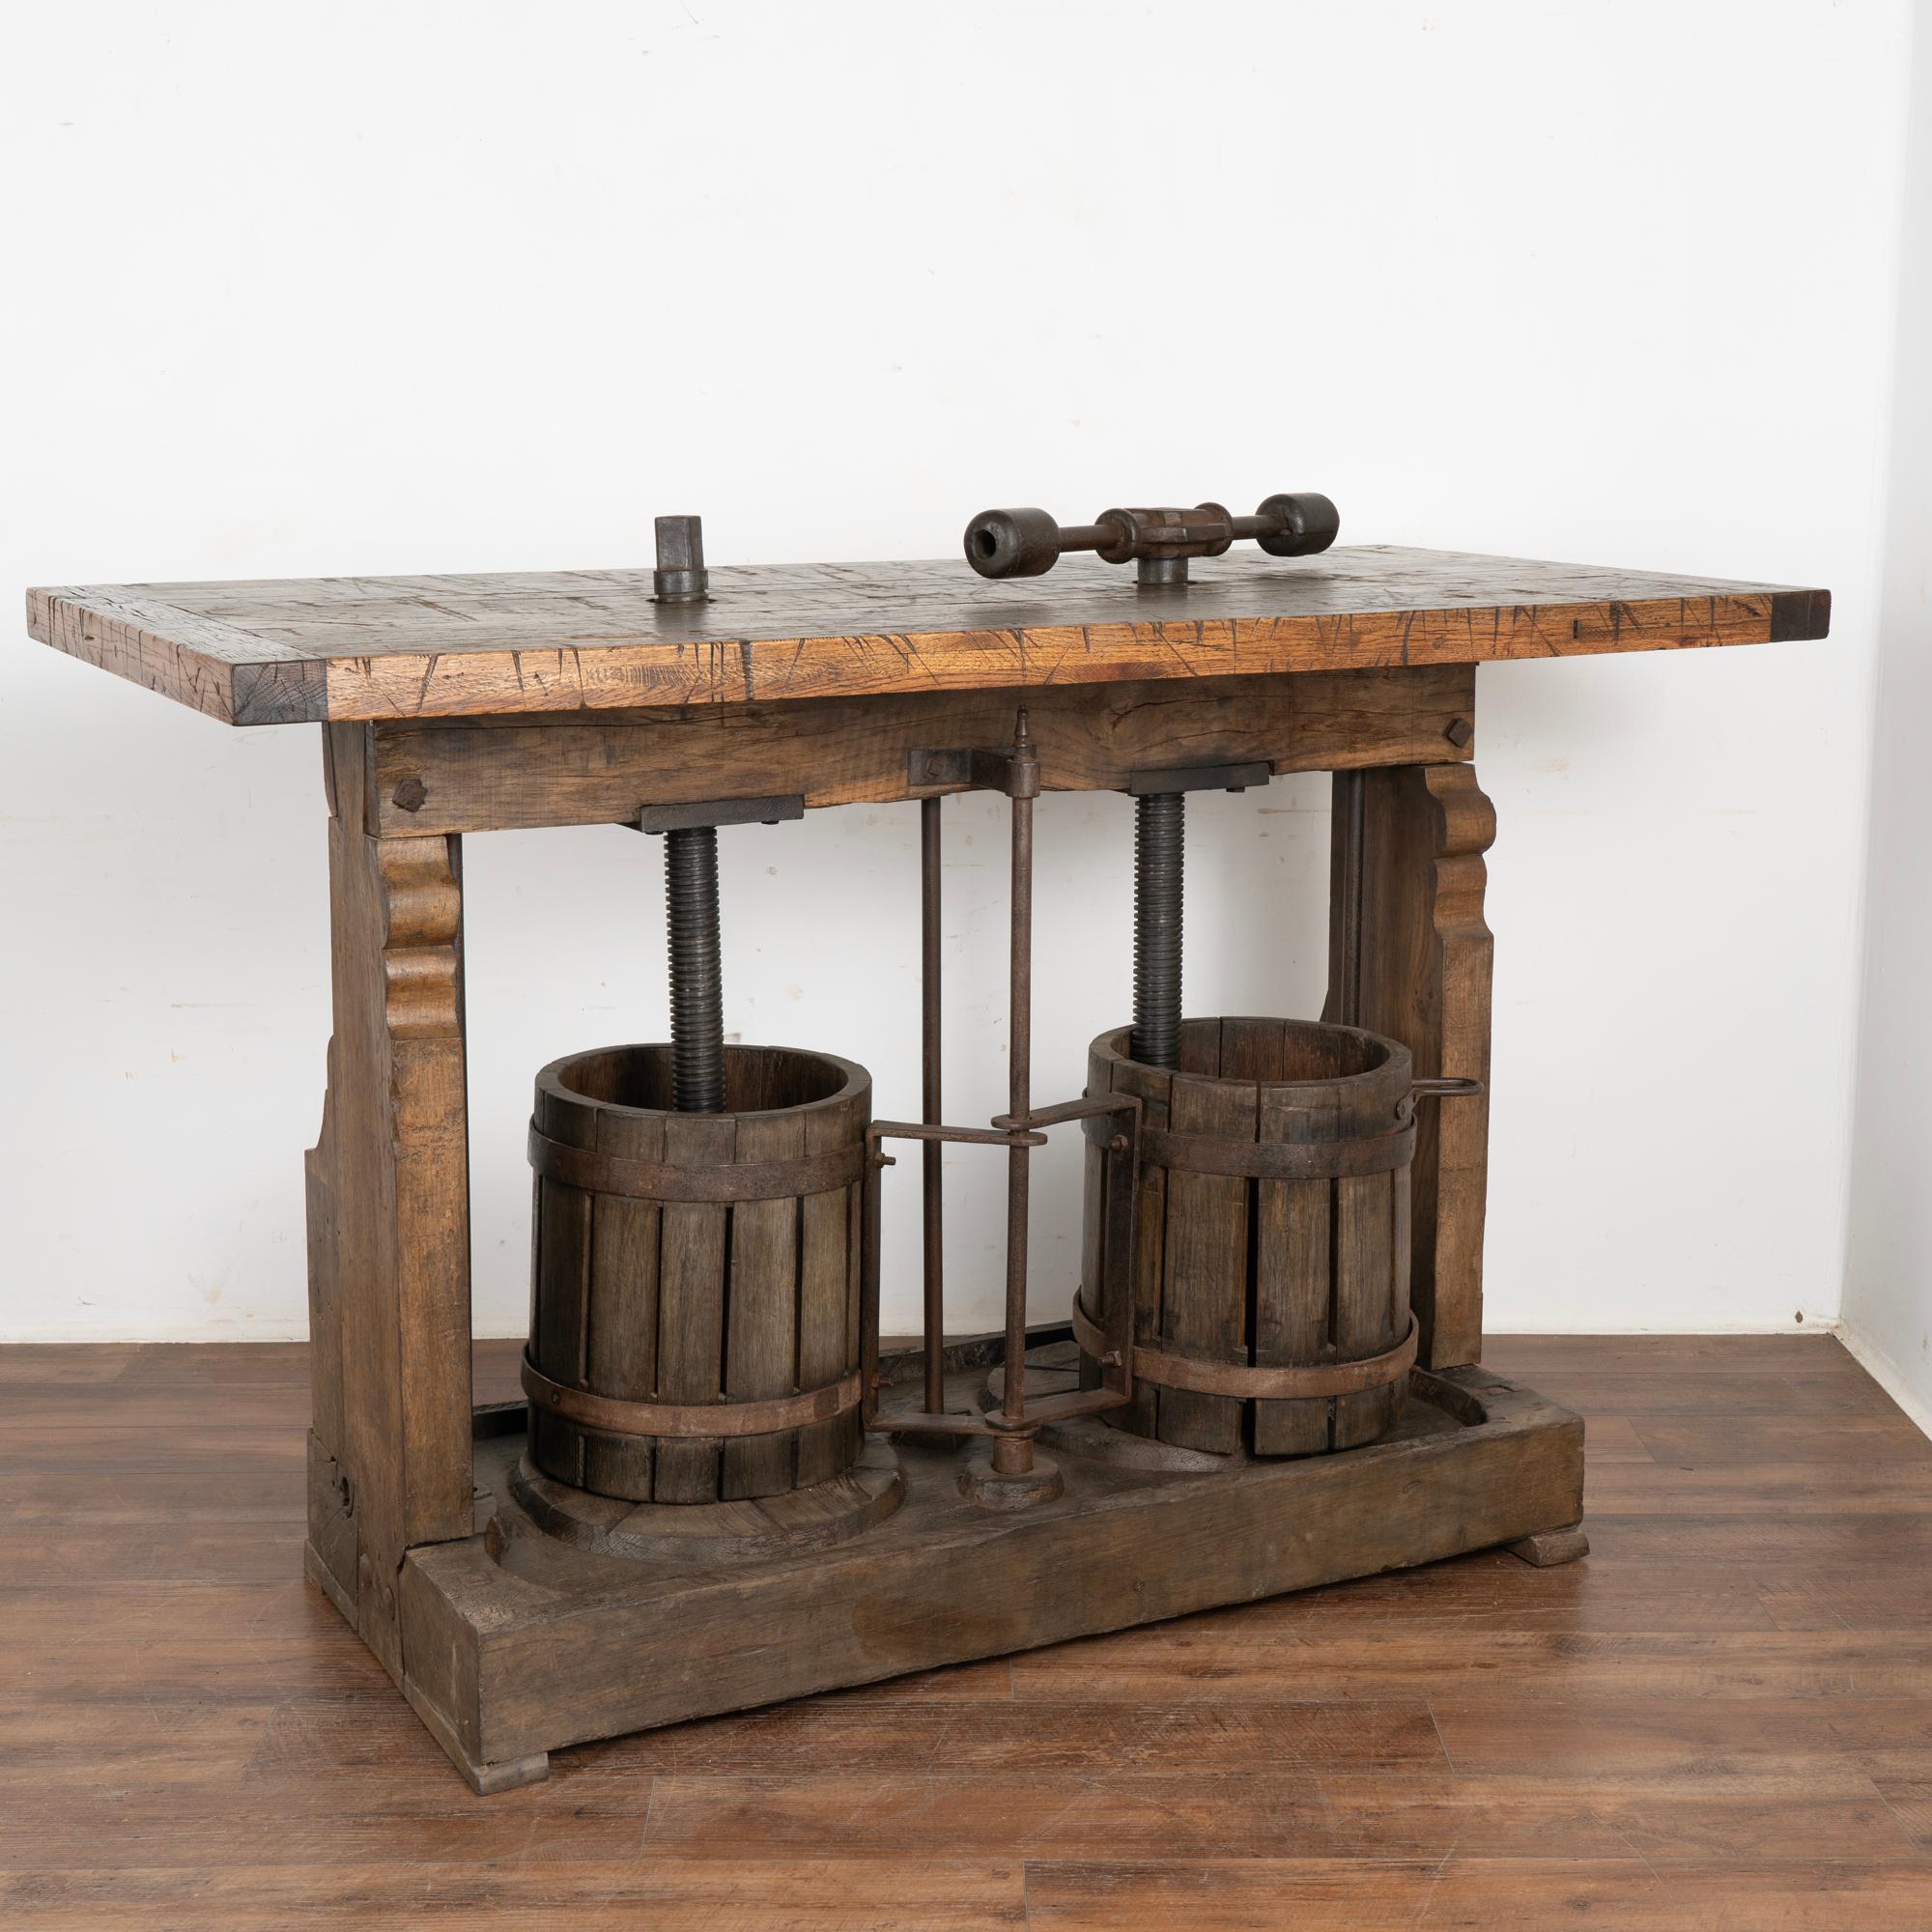 This all original wine tasting or bar top table was creating with an antique double wine press from Hungary serving as the unique and impressive base.
The top is made from old boxcar/railroad cart flooring which adds a strong balance to the